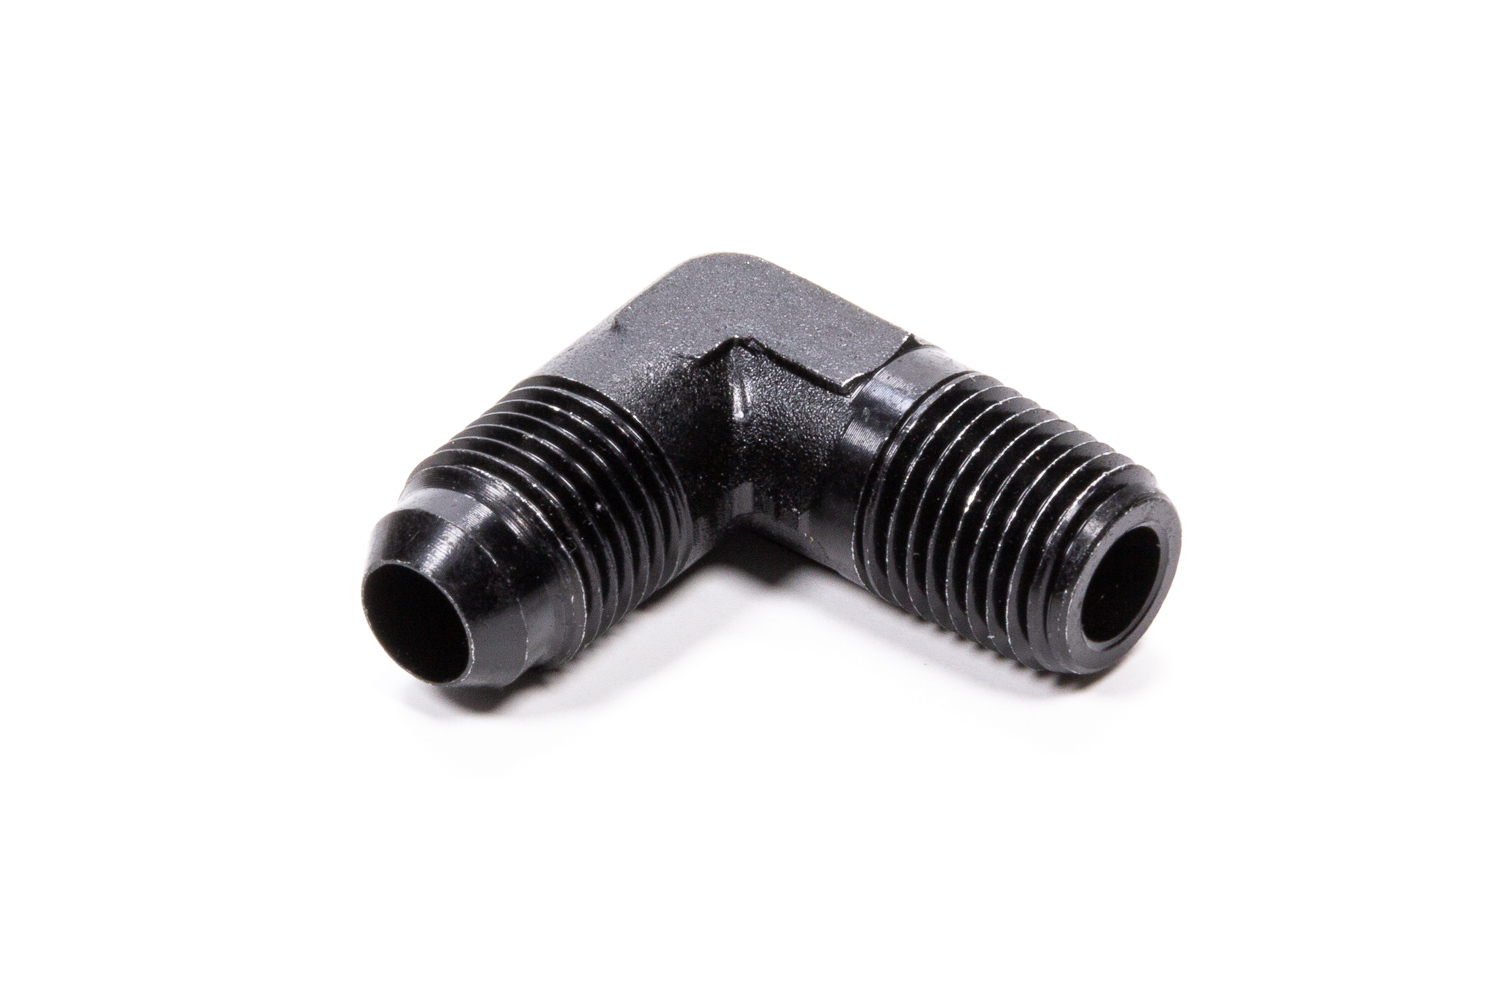 Fragola 482206-BL Fitting, Adapter, 90 Degree, 6 AN Male to 1/4 in NPT Male, Aluminum, Black Anodized, Each